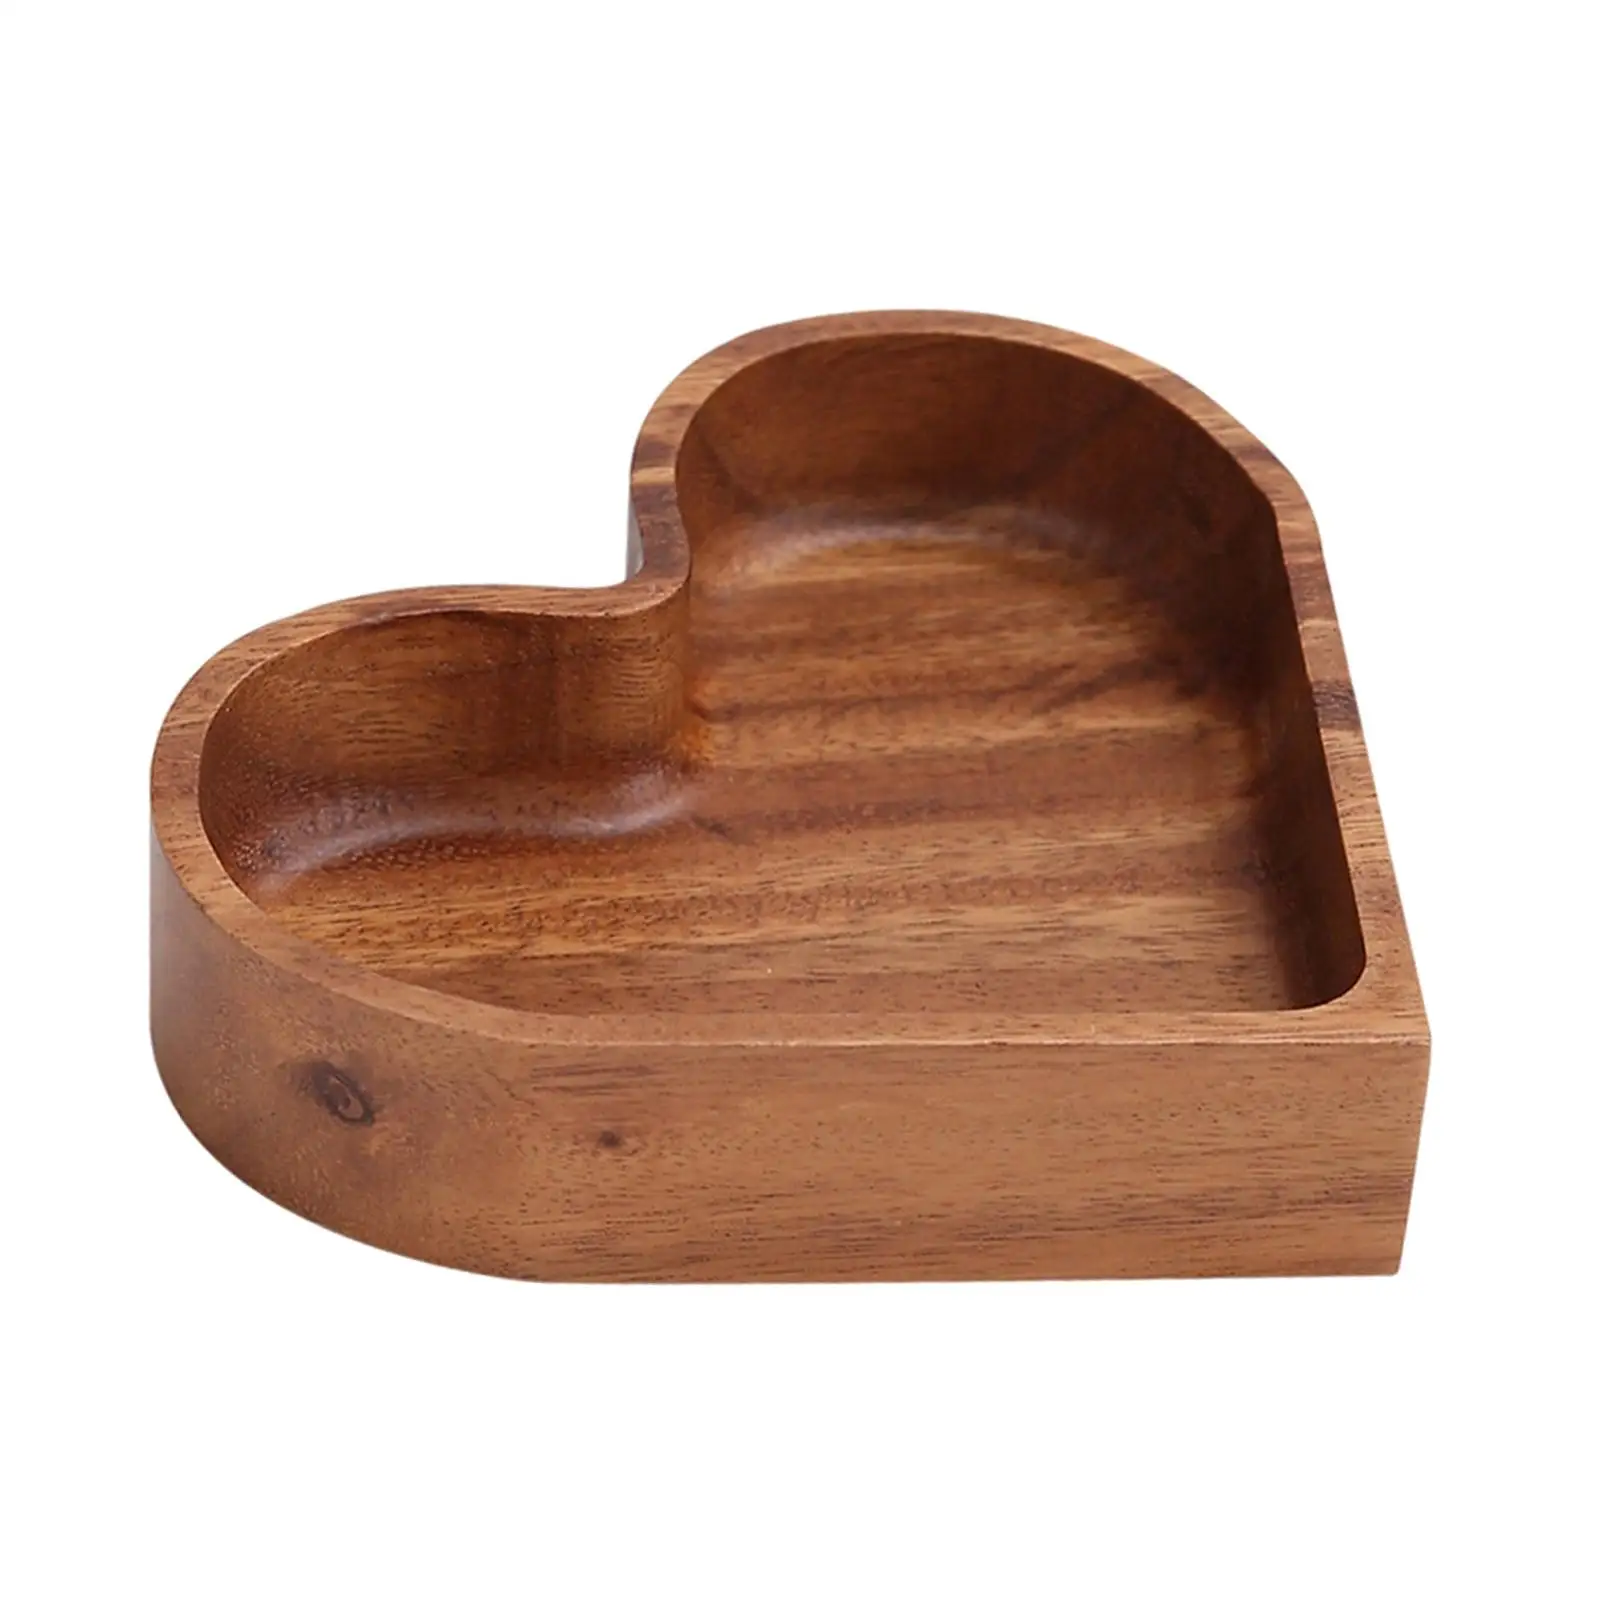 Wooden Serving Platters Tray Farmhouse Decor Breakfast Tray Organizer for Bathroom, Outdoors Multi Functional Heart Shaped Plate